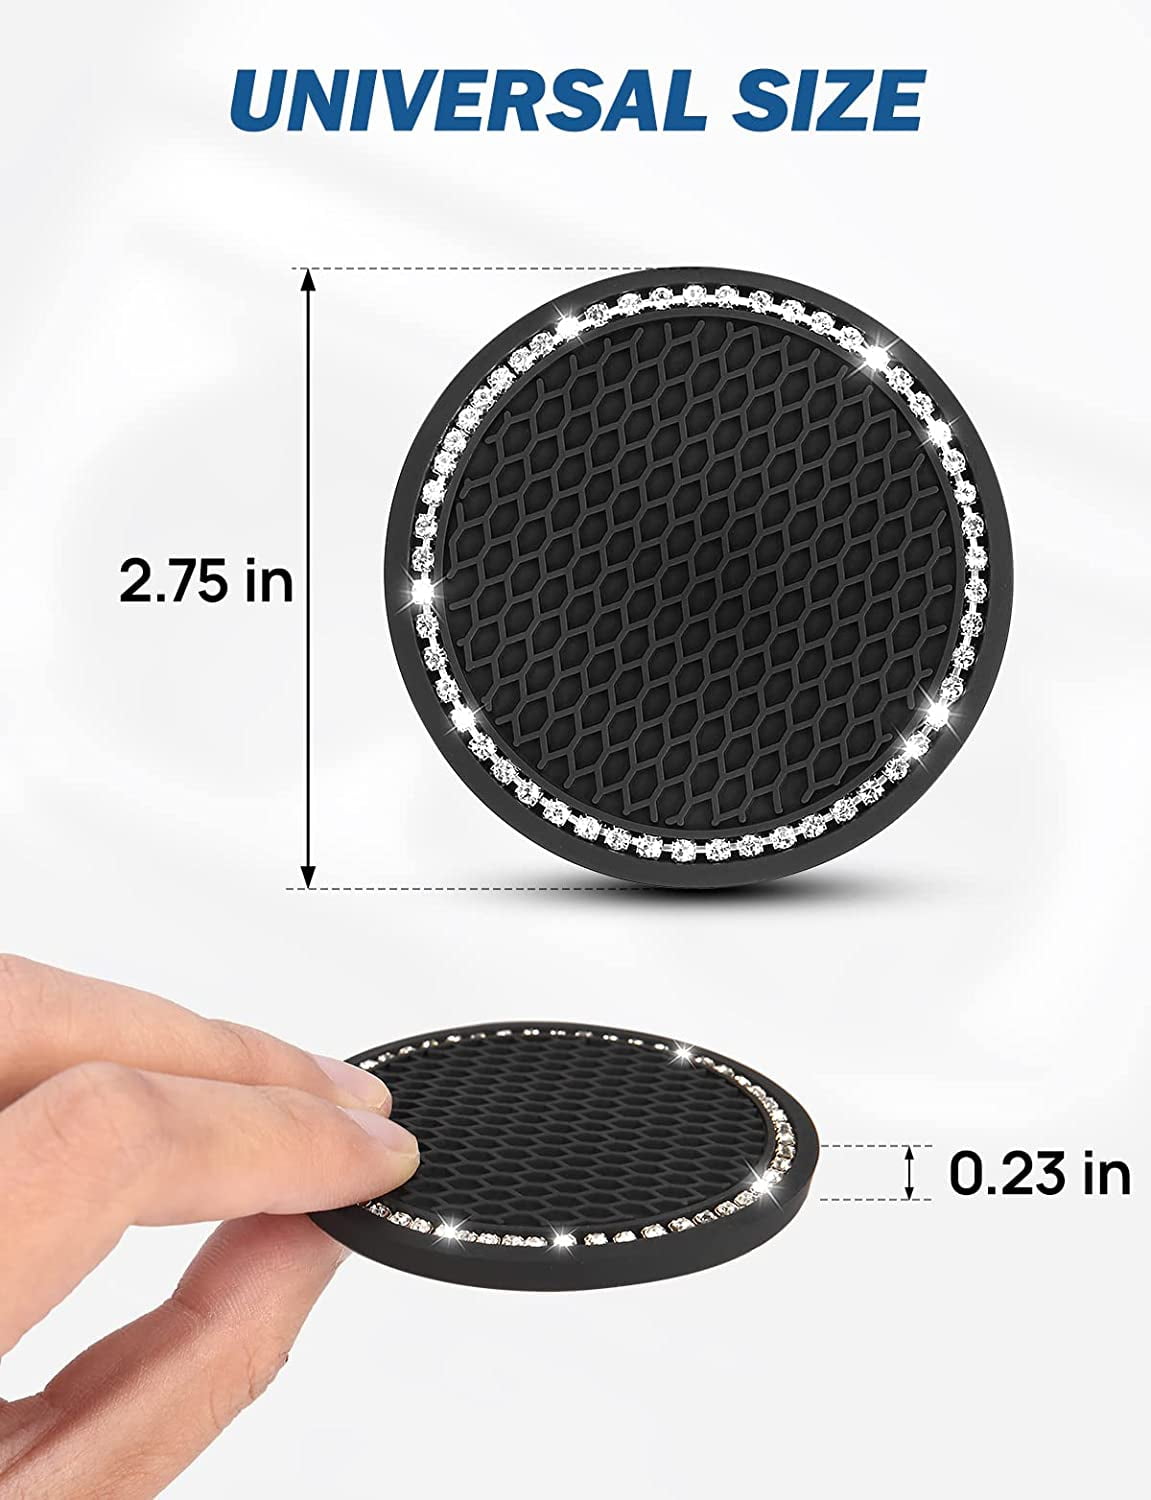 Car Coasters for Cup Holders, 2 Pack Universal Anti-Slip Car